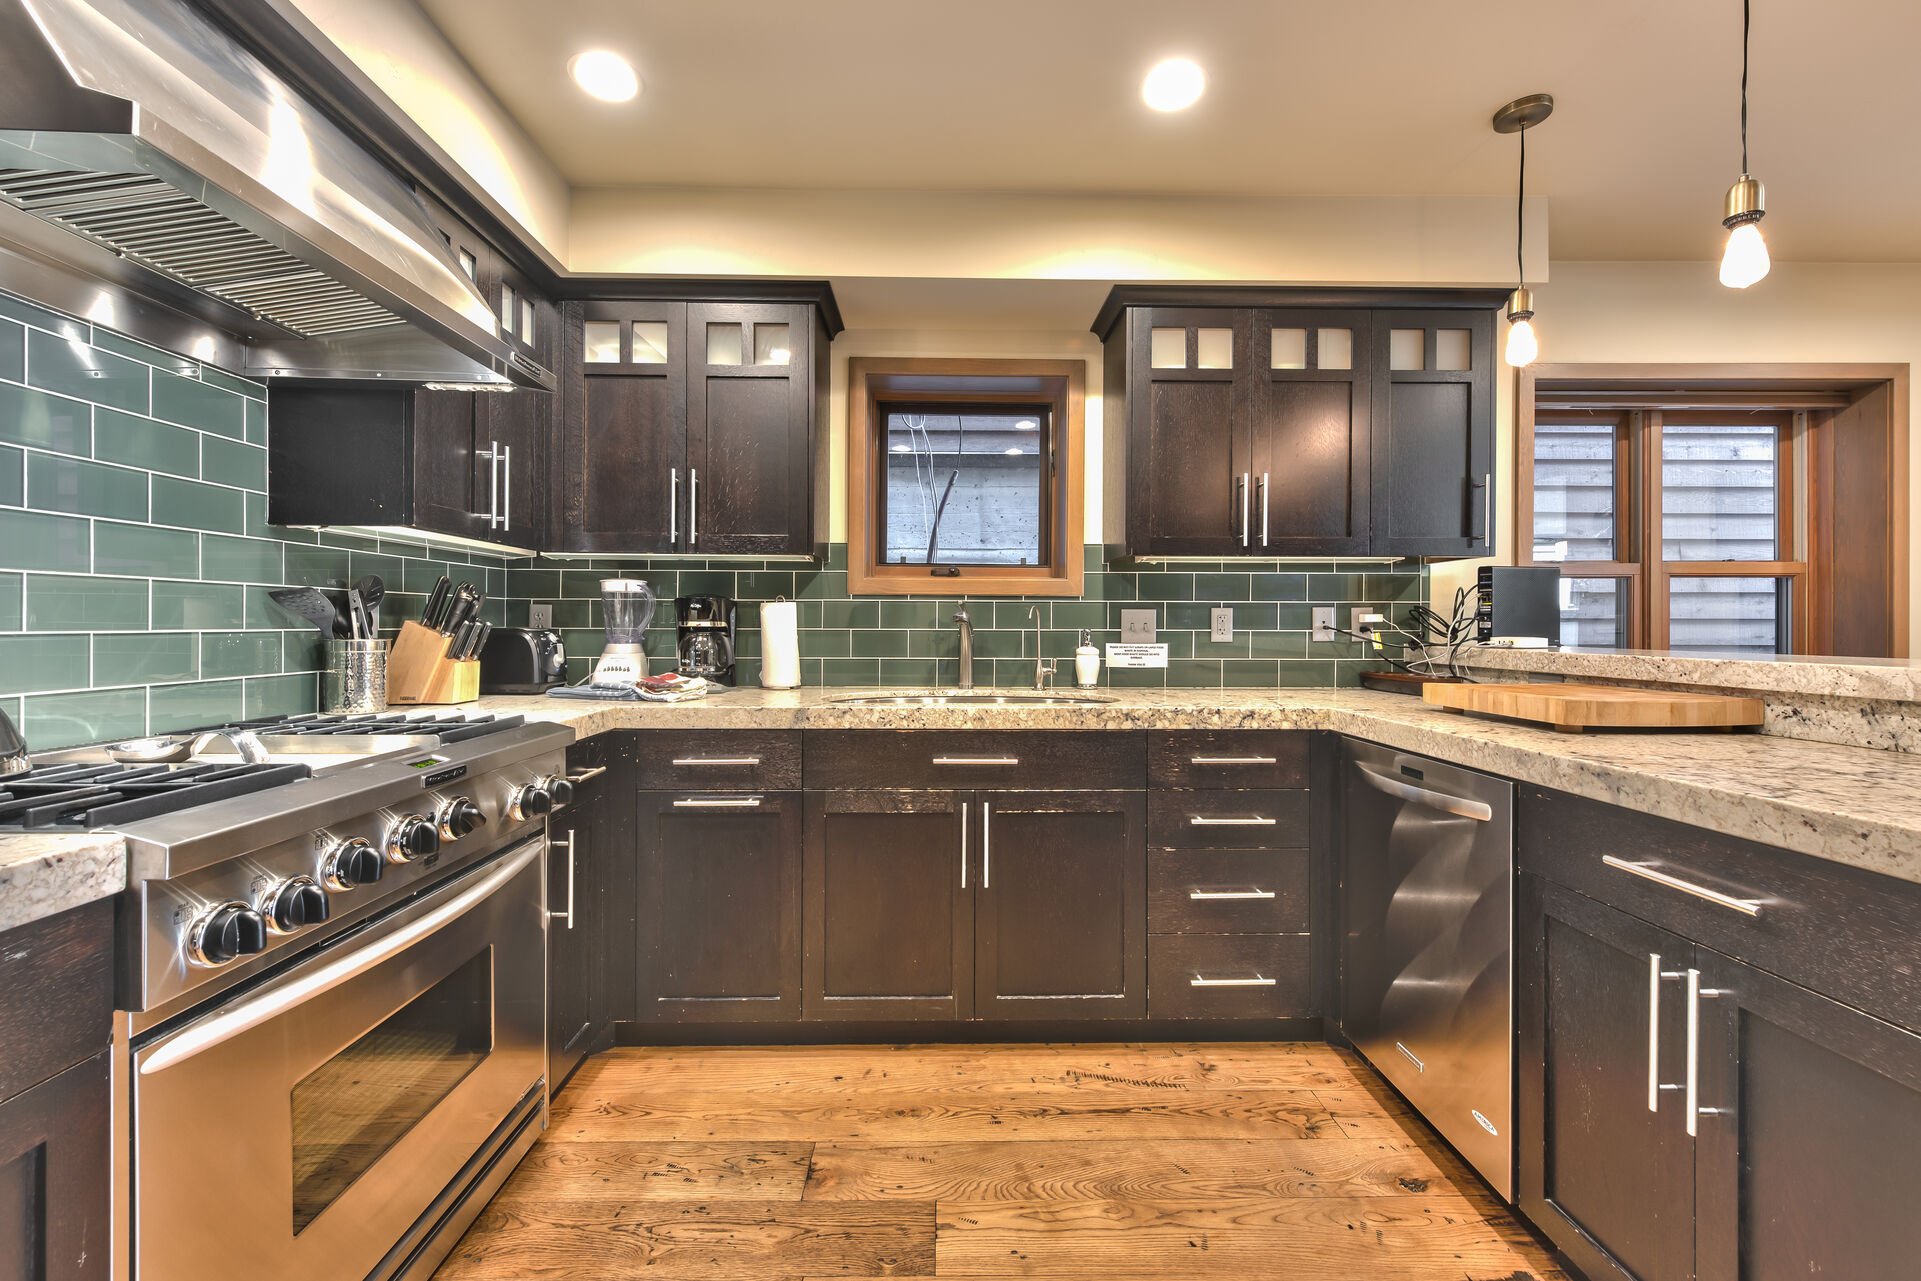 Fully Equipped Kitchen with Stainless Steel Appliances including a 4-Burner Gas Range